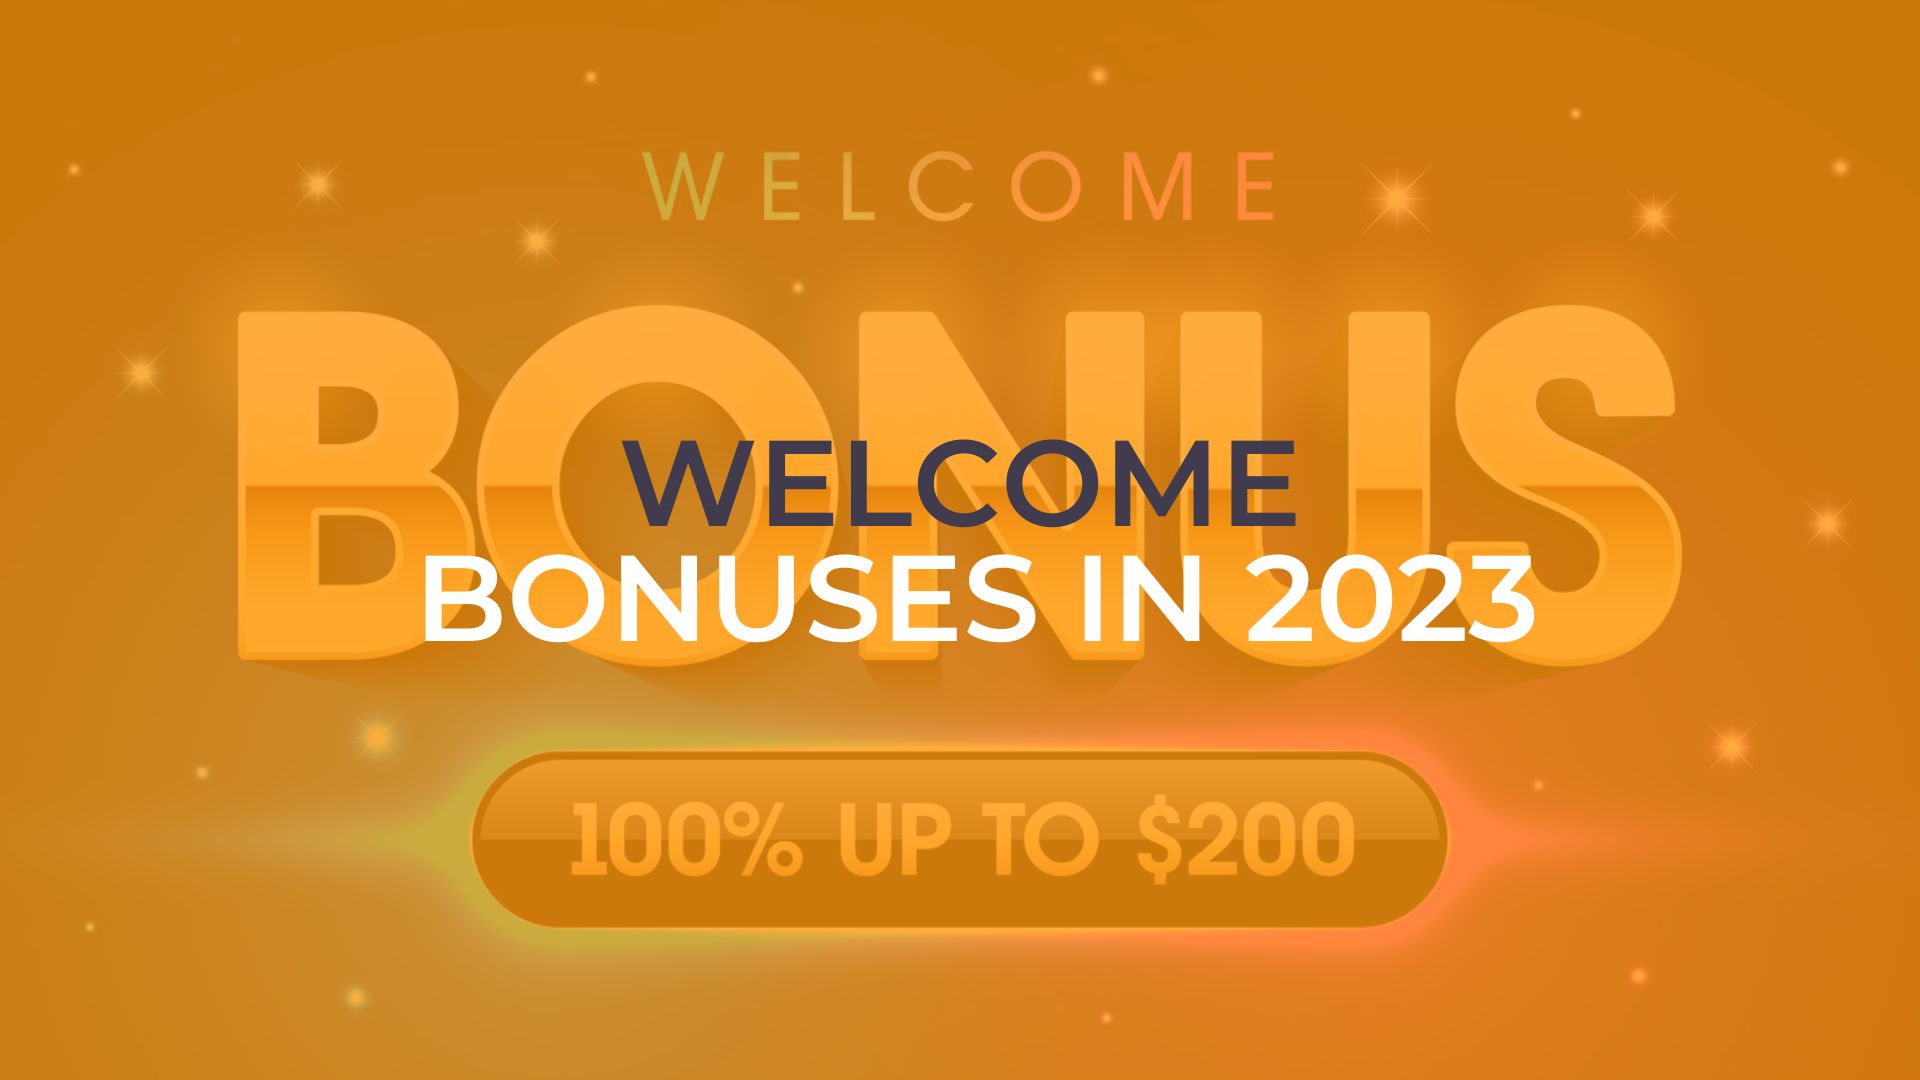 TOP 10 WELCOME BONUSES IN 2023